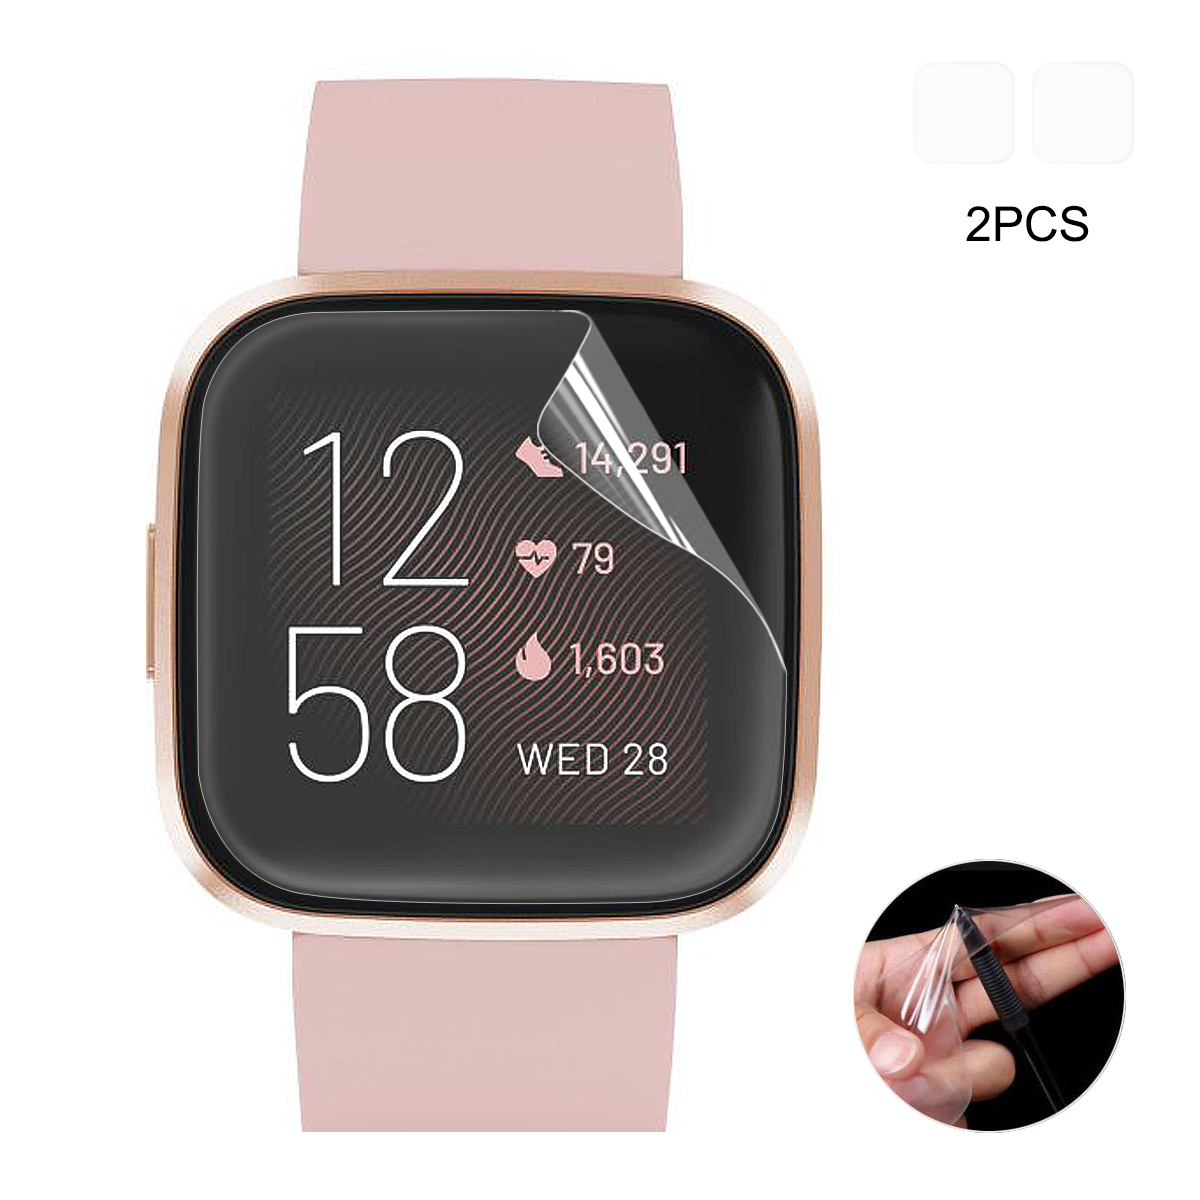 Bakeey 2pcs Watch Screen Protector TPU Ultra-thin Explosion-proof Film for Fitbit Versa 2 Smart Watch